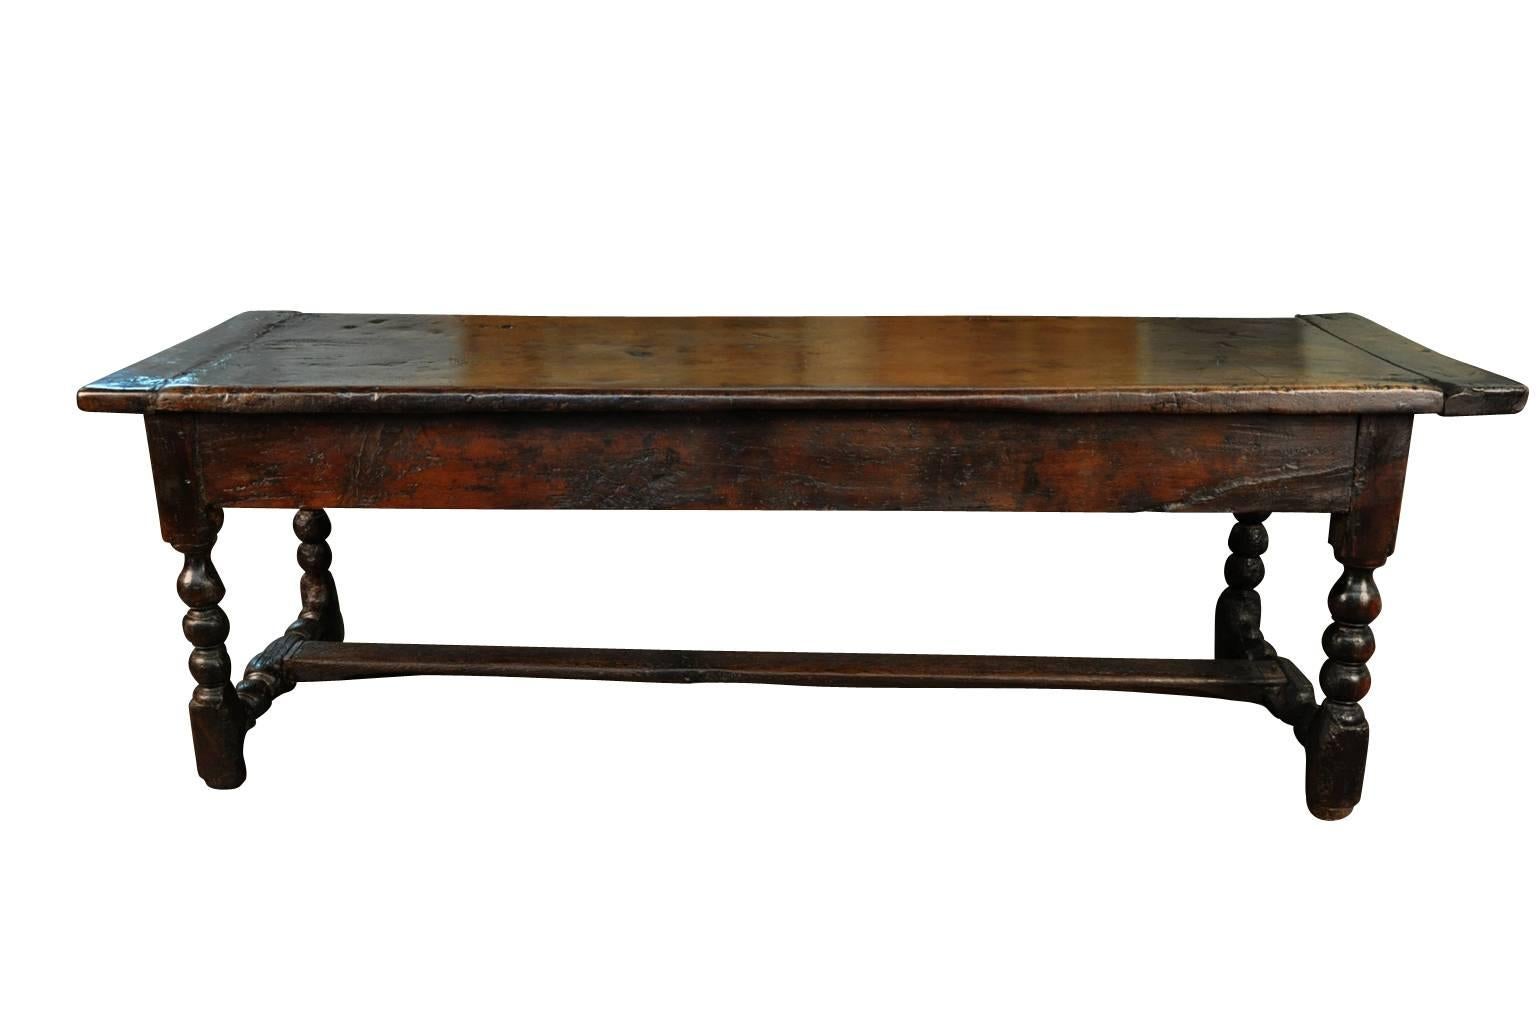 An outstanding 18th century Spanish trestle console table. Masterly constructed from walnut with an exceptional solid board top. There is a single drawer to one end with a very handsome carved fascia. Sensational patina - very deep and luminous.